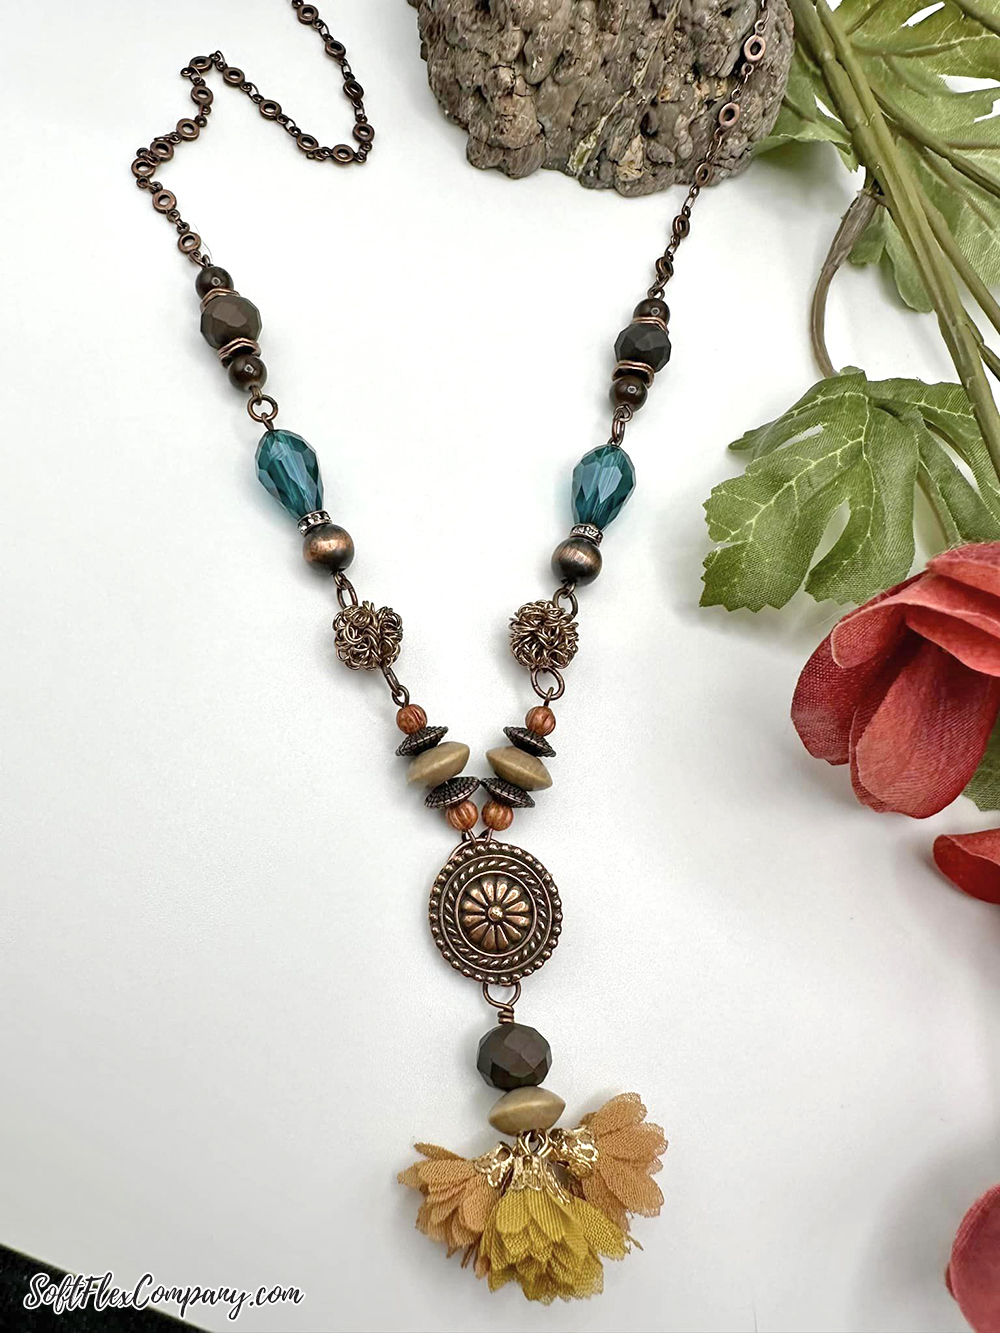 Moroccan Bazaar Jewelry by Stacy Leigh Meissner